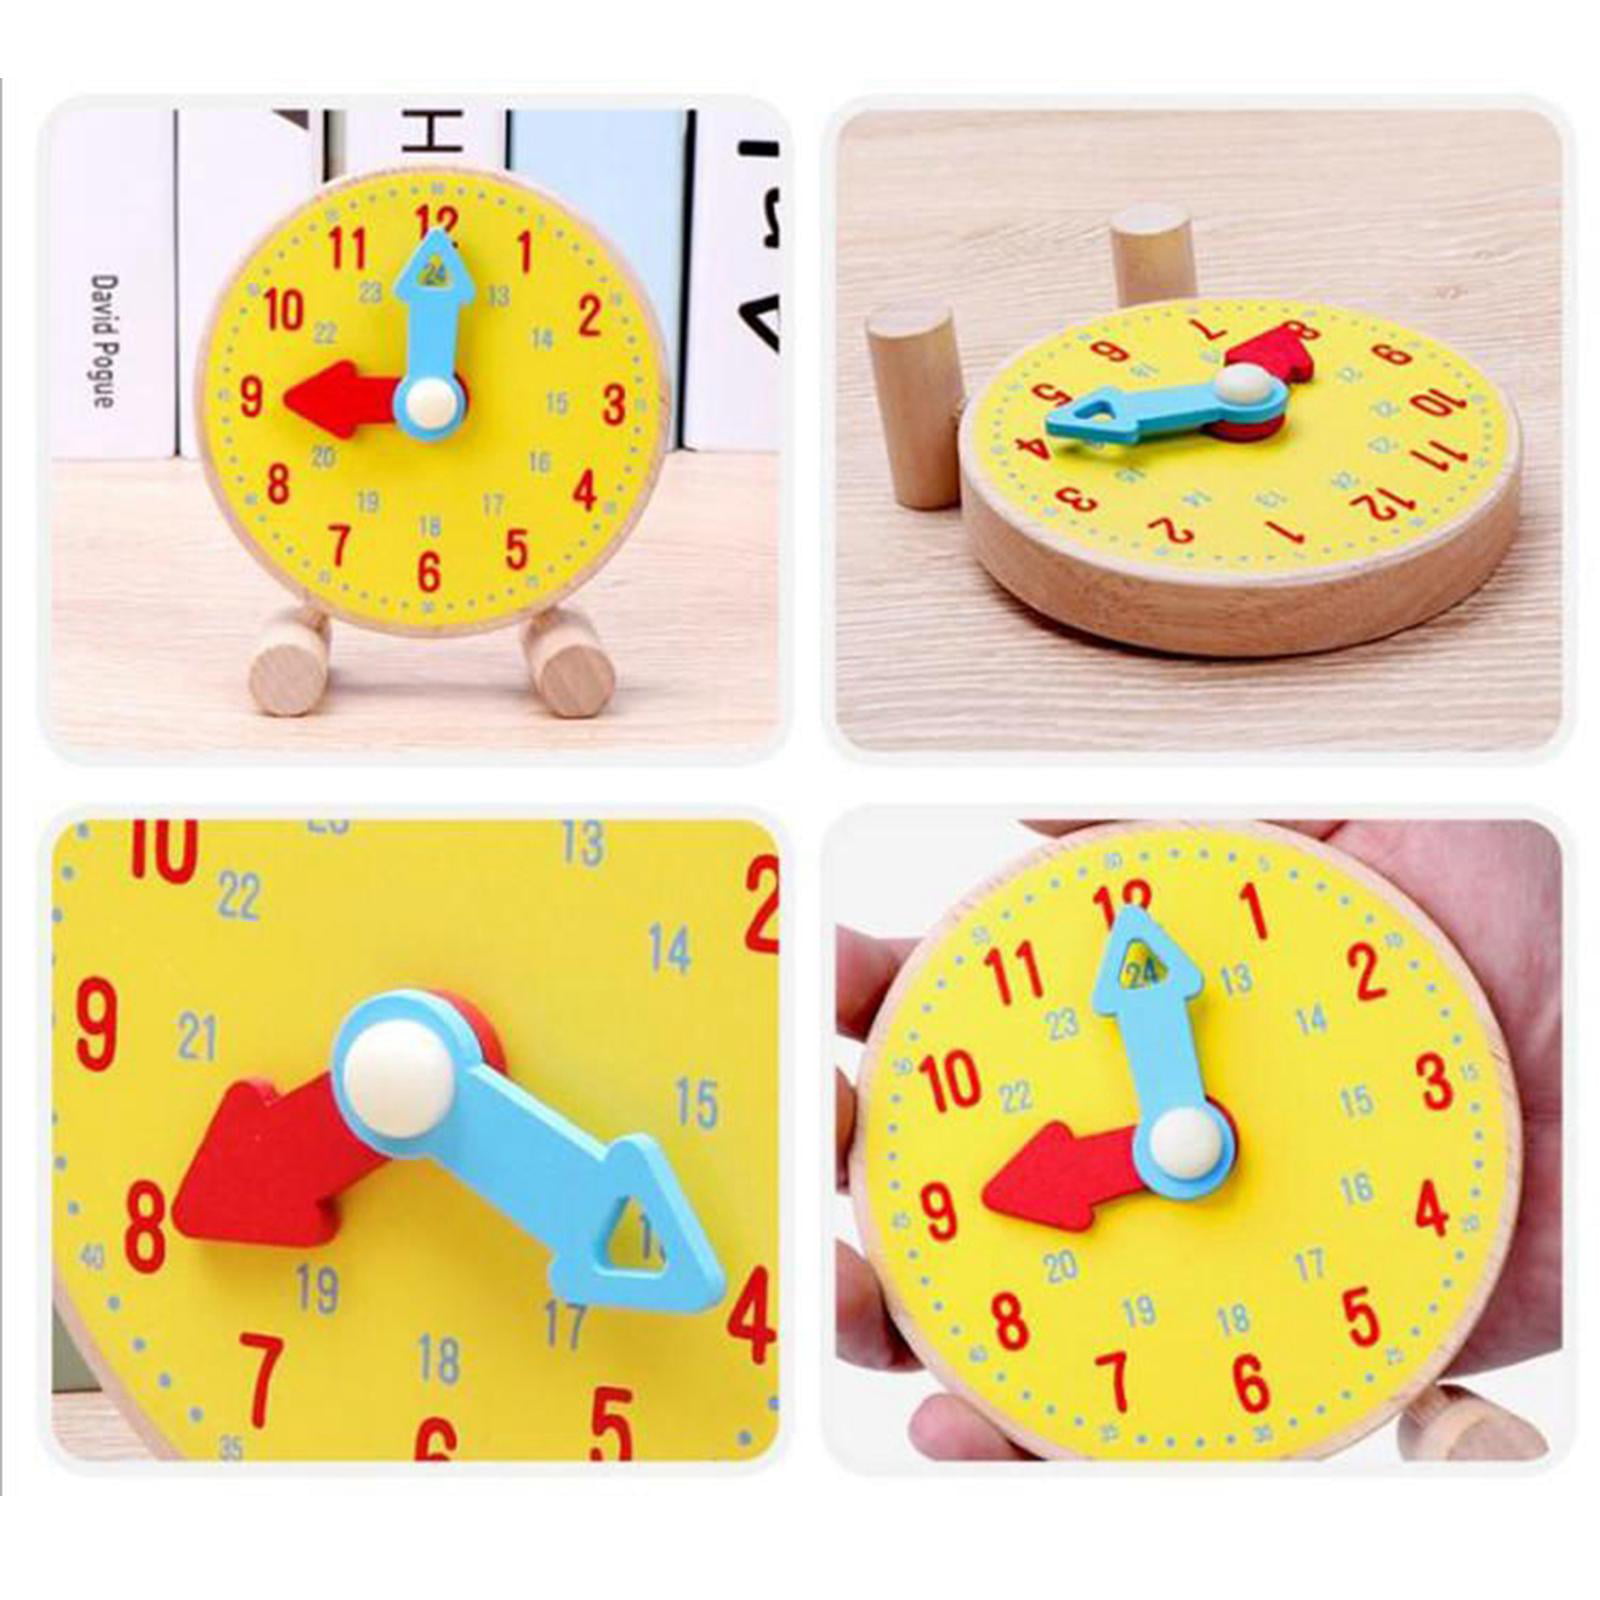 Learn To Tell the Time Preschool Teaching Clock Model Toy Wooden for Kids 